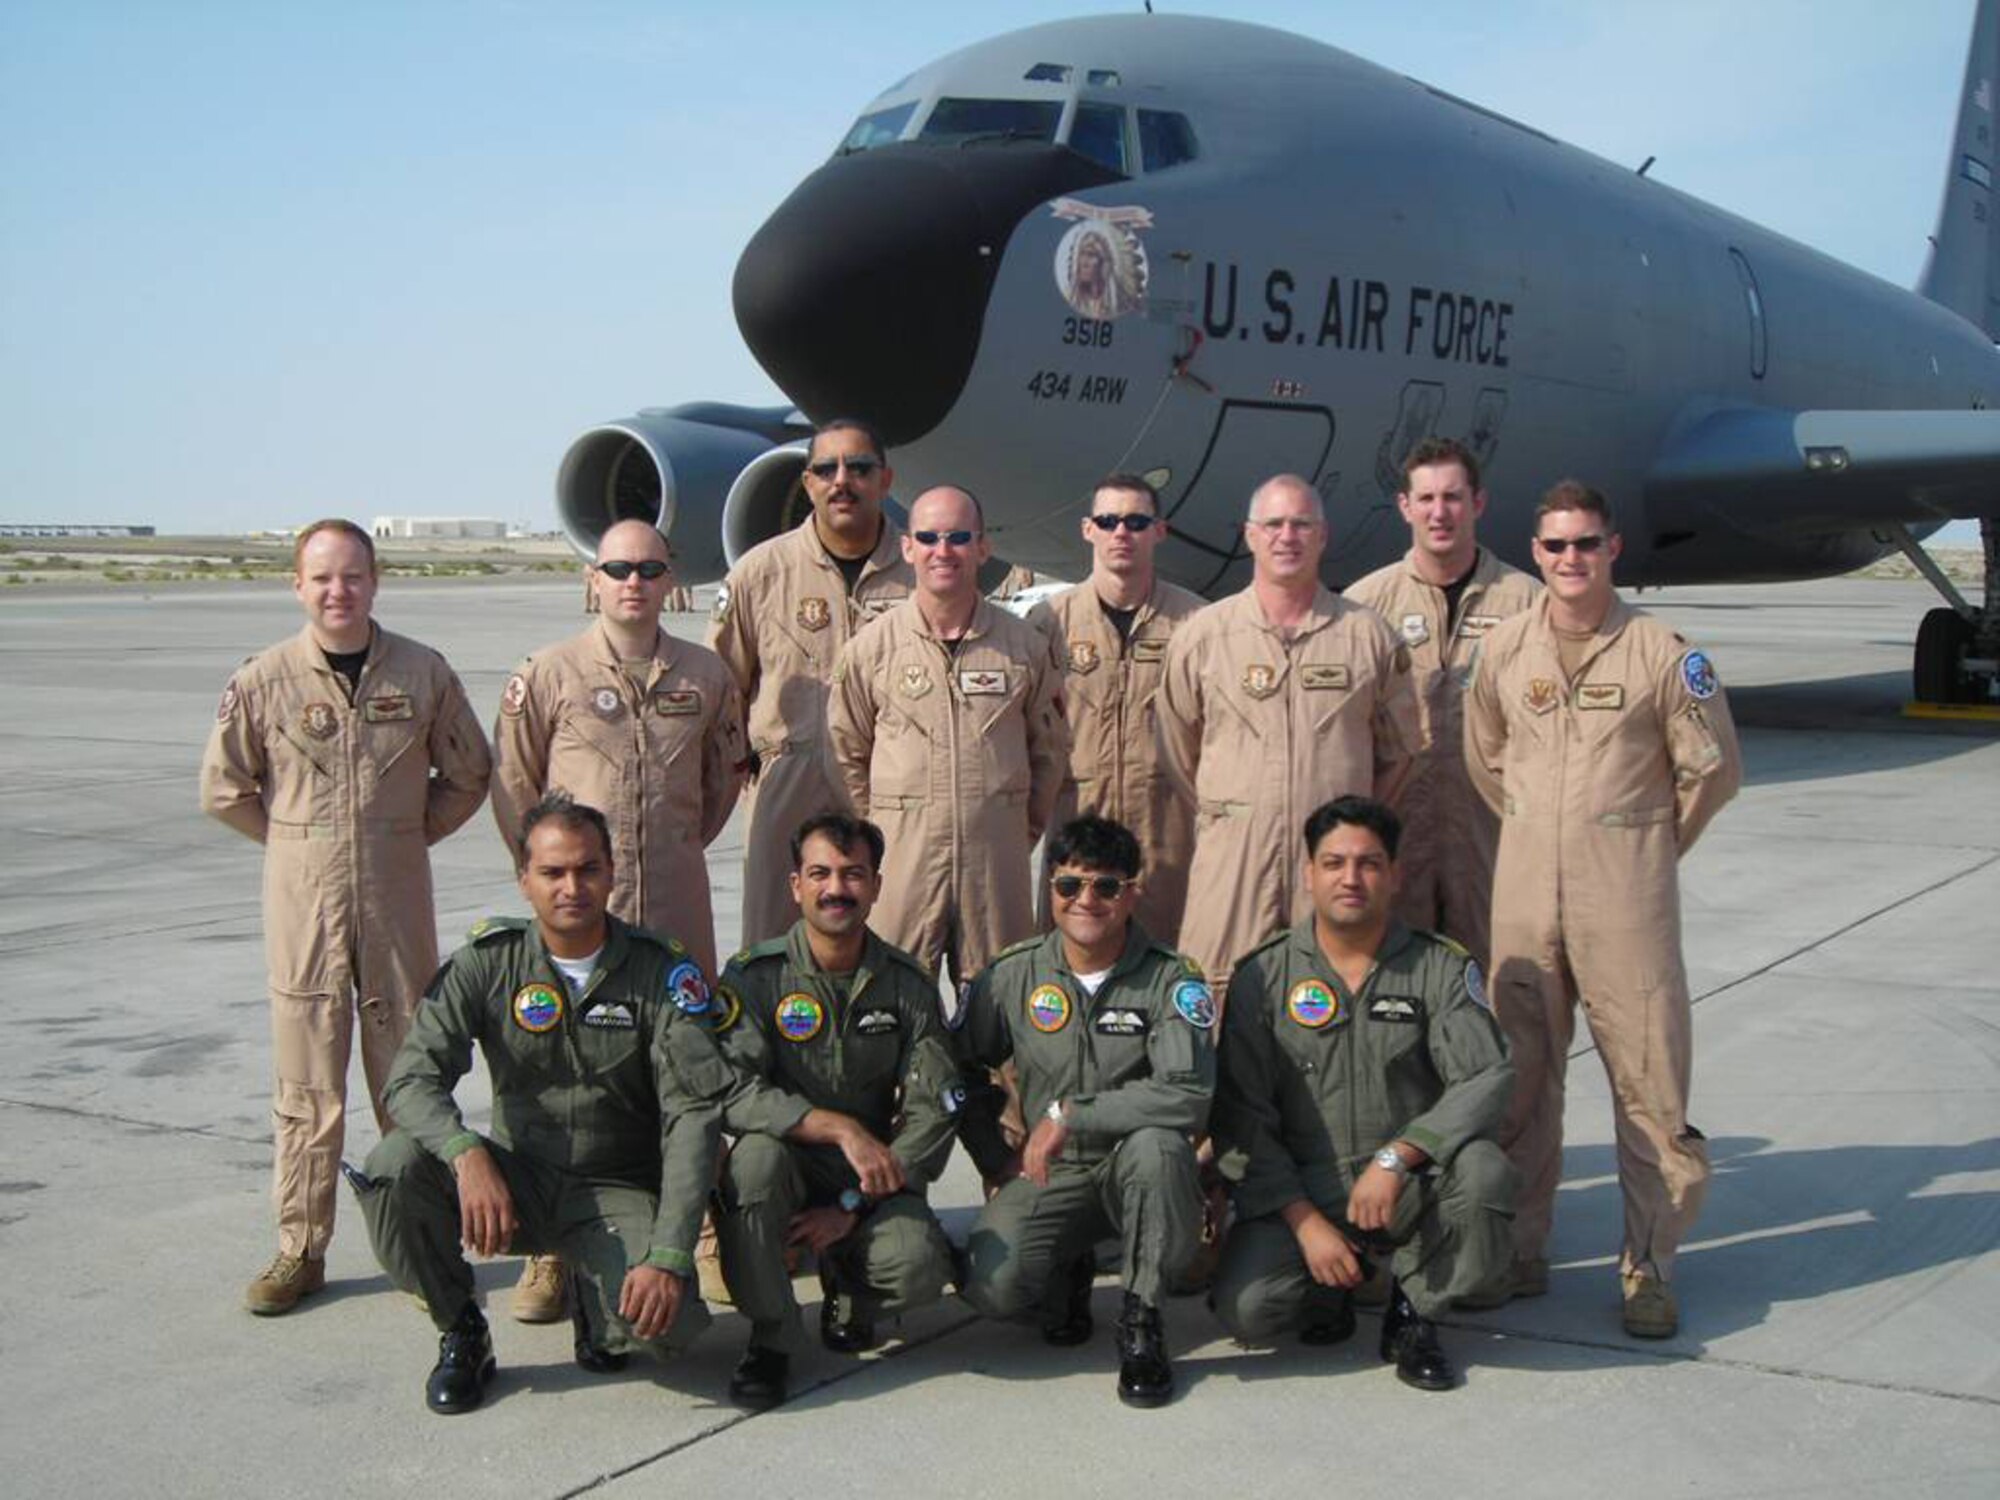 GRISSOM AIR RESERVE BASE, Ind. -- Aircrew members from Grissom ARB stand with members of the Pakistan air force, who participated in a historic refueling first during Exercise Iron Falcon 0701. Grissom crew members peformed the very first aerial refueling mission with the Pakistan air force. Grissom's members are standing. From the left they are Lt. Col. Kevin  Hayes, 1st Lt. Rob Hastings, Master Sgt. Kim Orange, Lt. Col. Gerry Conway, 1st Lt. Rick Hastings, Lt. Col. James Corcoran, Master Sgt. Mike Morgan and Maj. Chad Silva. (U.S. Air Force Photo)